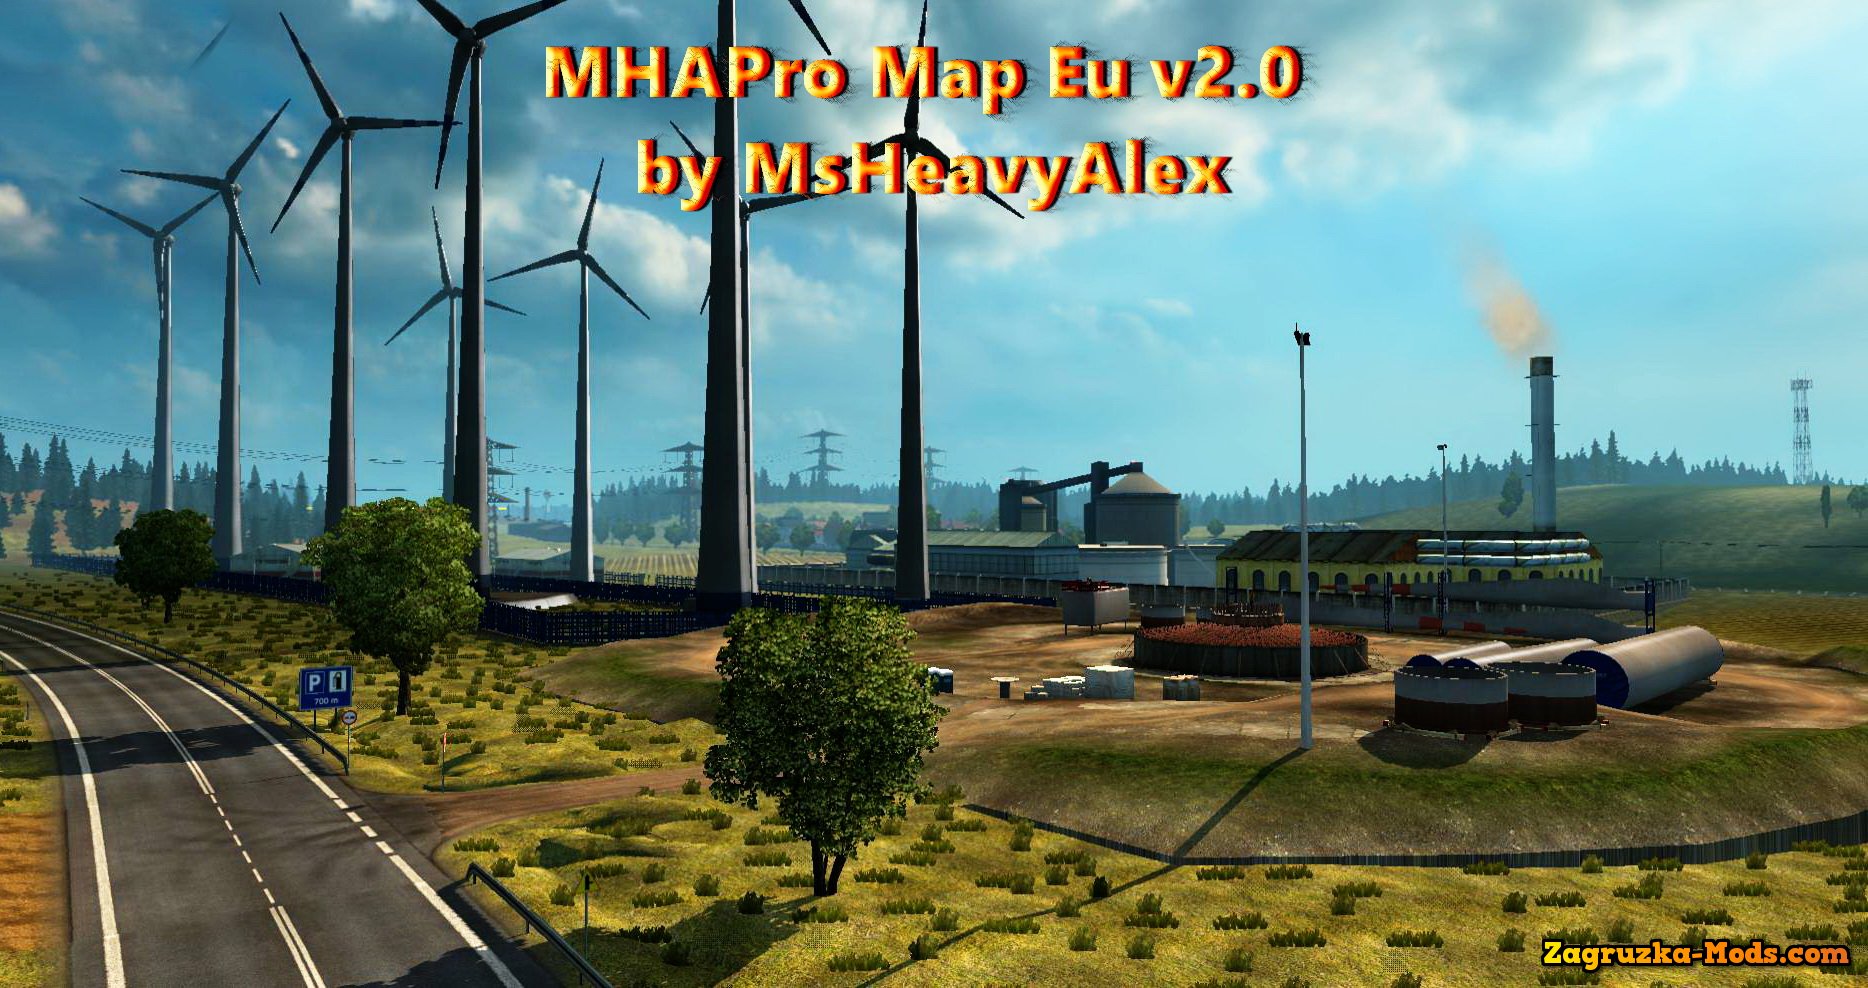 MHAPro Map Eu v2.0 by MsHeavyAlex for ETS 2